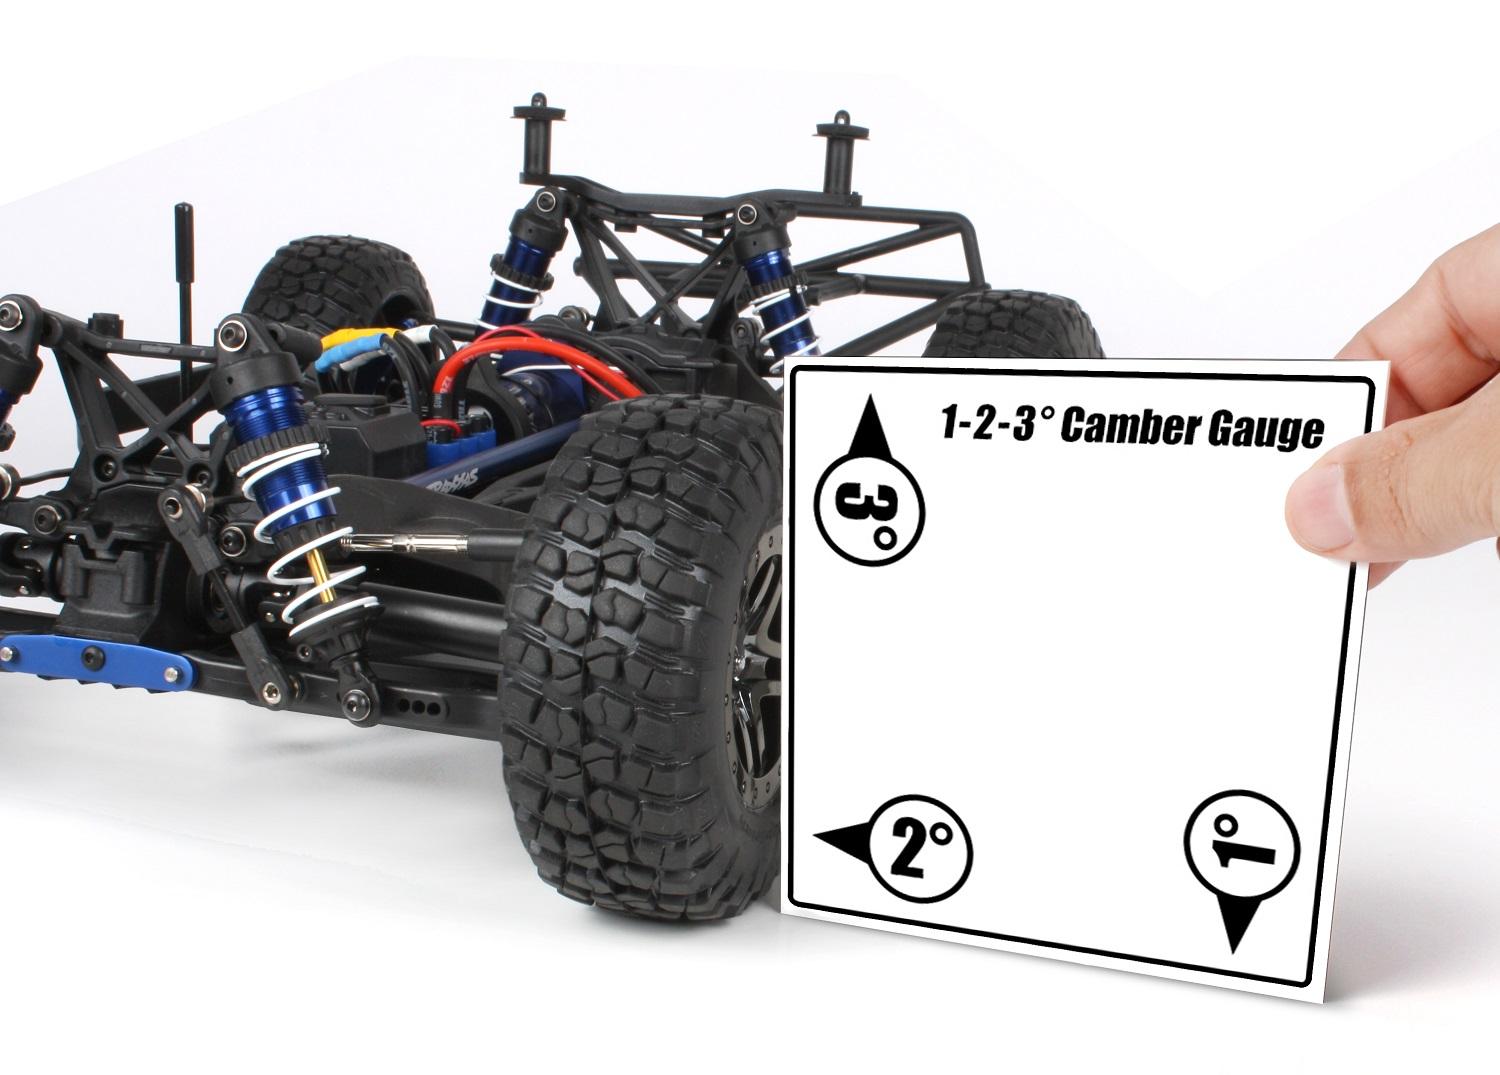 Traxxas Slash: Section: FAQs and Tips for Getting the Most out of Your Traxxas Slash